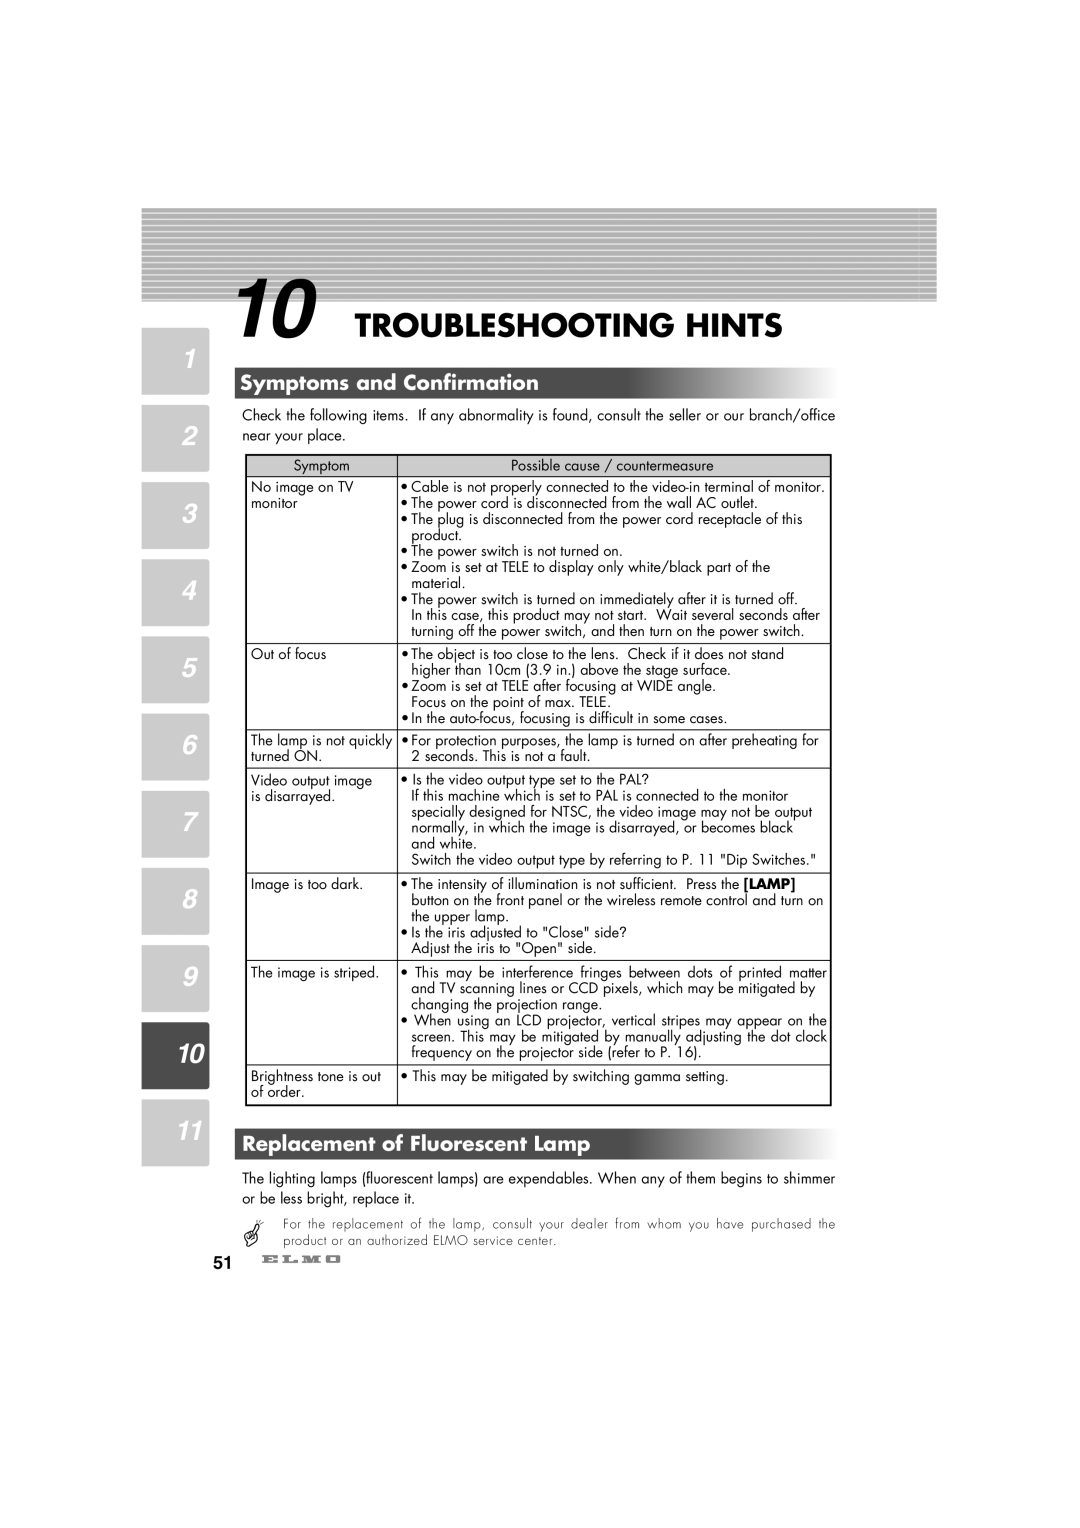 Elmo HV-7100SX instruction manual Troubleshooting Hints, Symptoms and Confirmation, Replacement of Fluorescent Lamp 